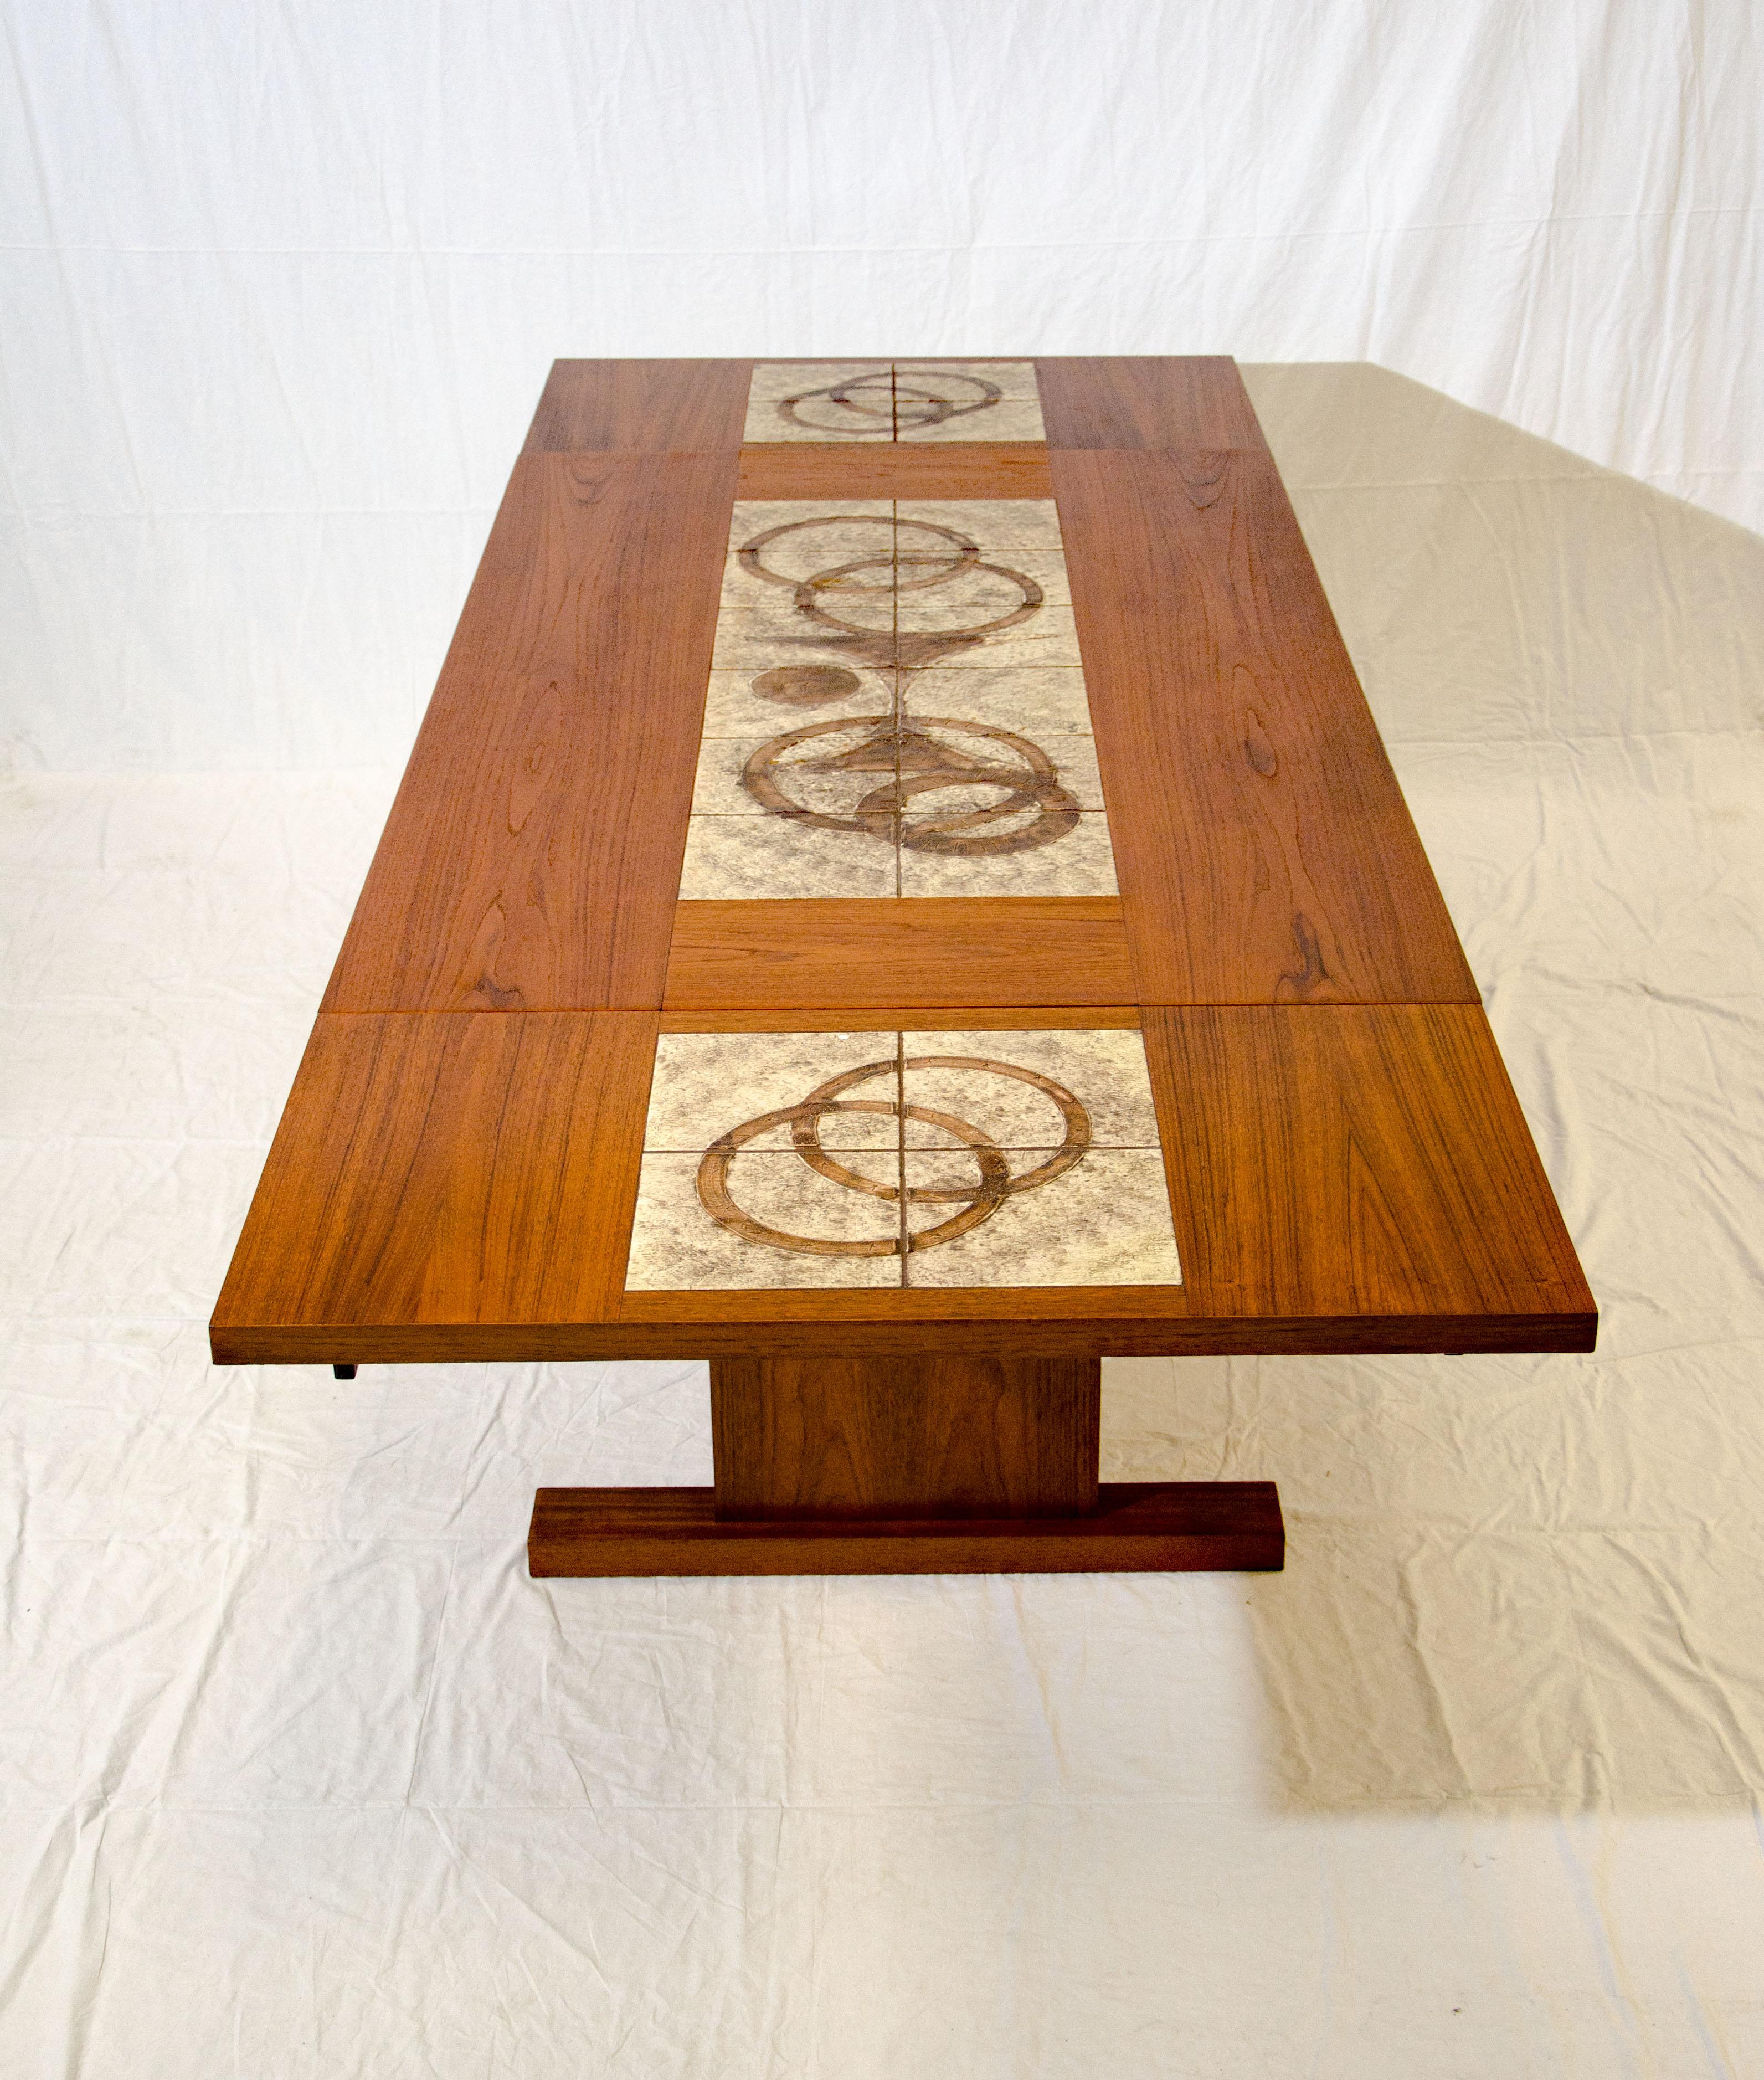 Scandinavian Modern Danish Teak Dining Table with Tile Inserts and Two Extensions